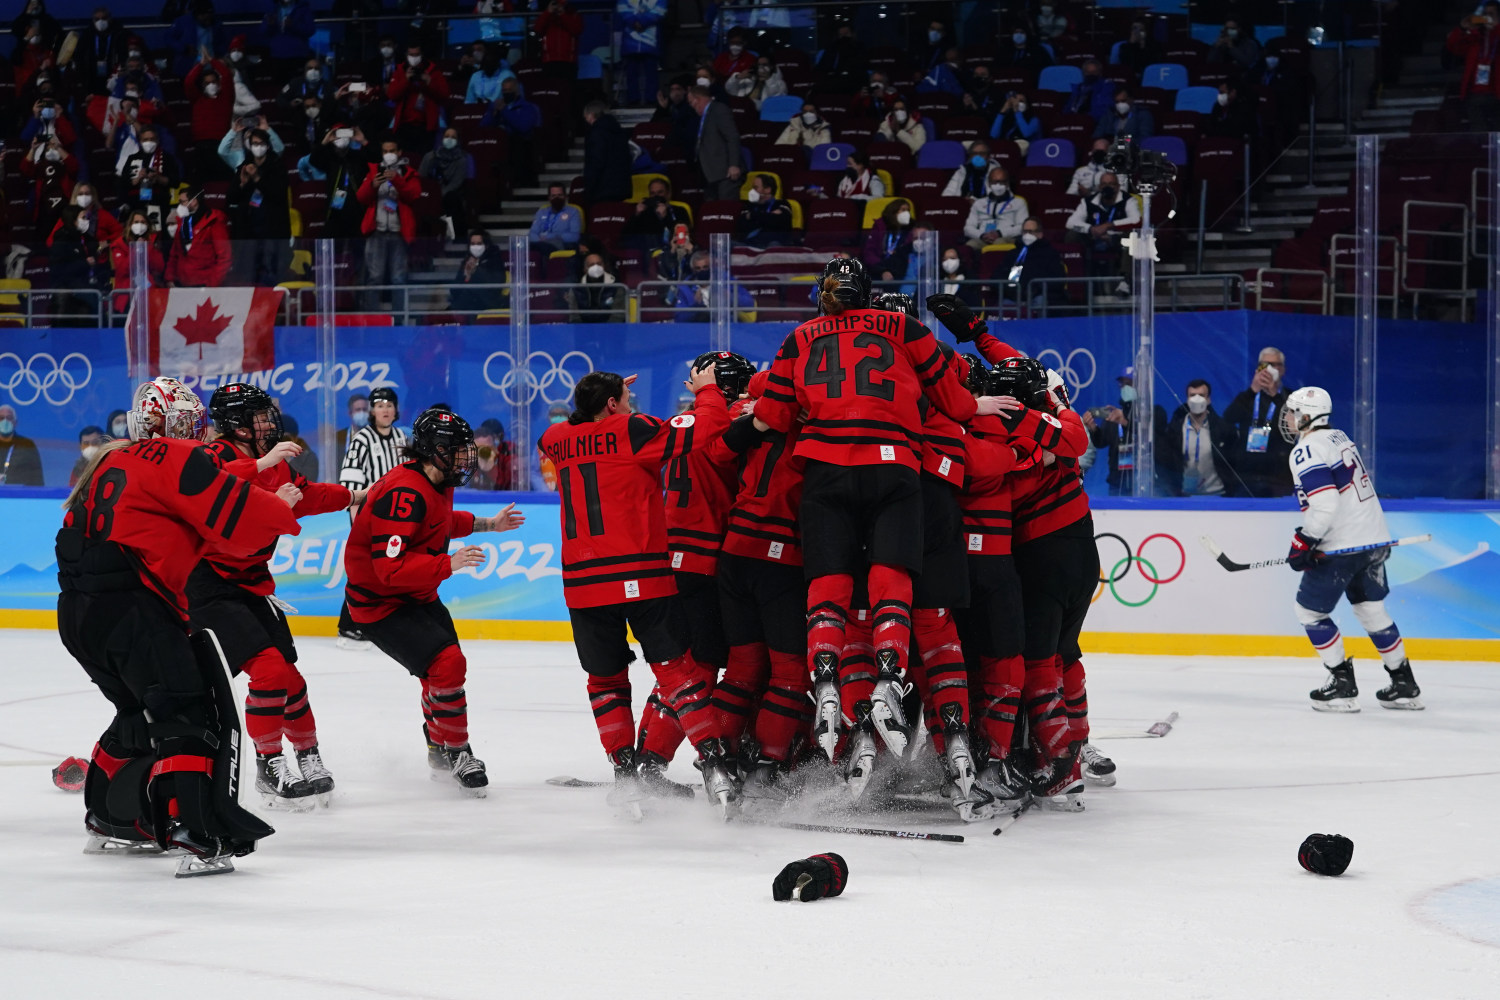 U.S. women's hockey takes home Olympic silver after losing to